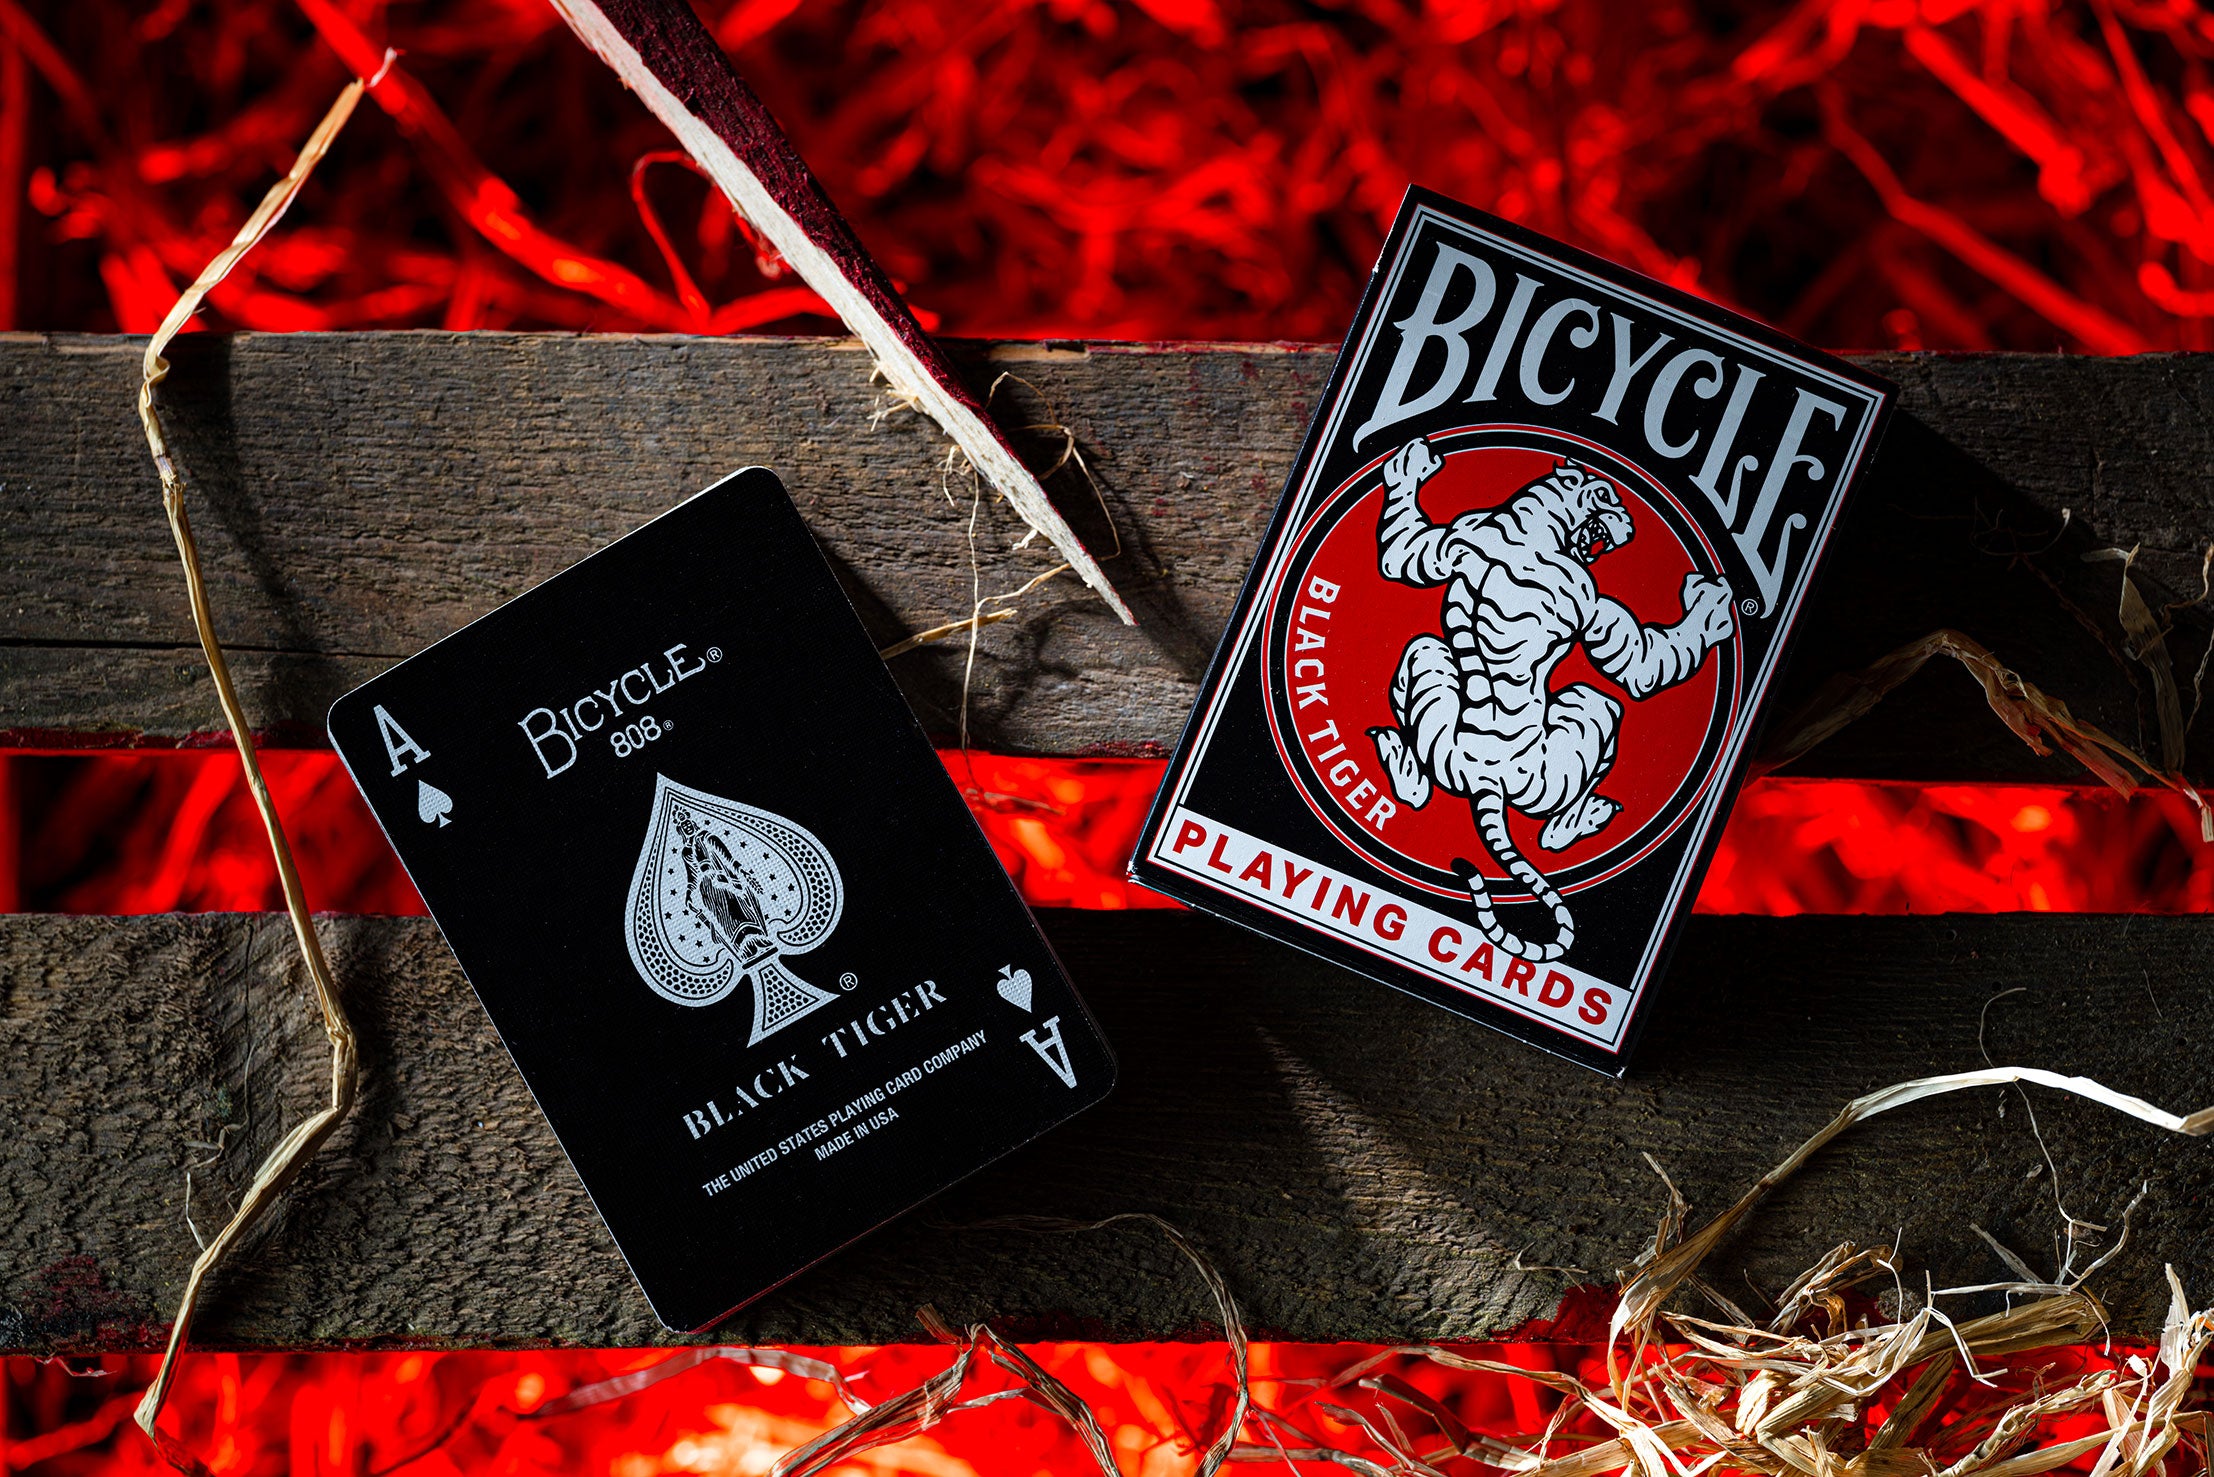 Black Tiger: Revival Edition by USPCC Crushed | Ellusionist